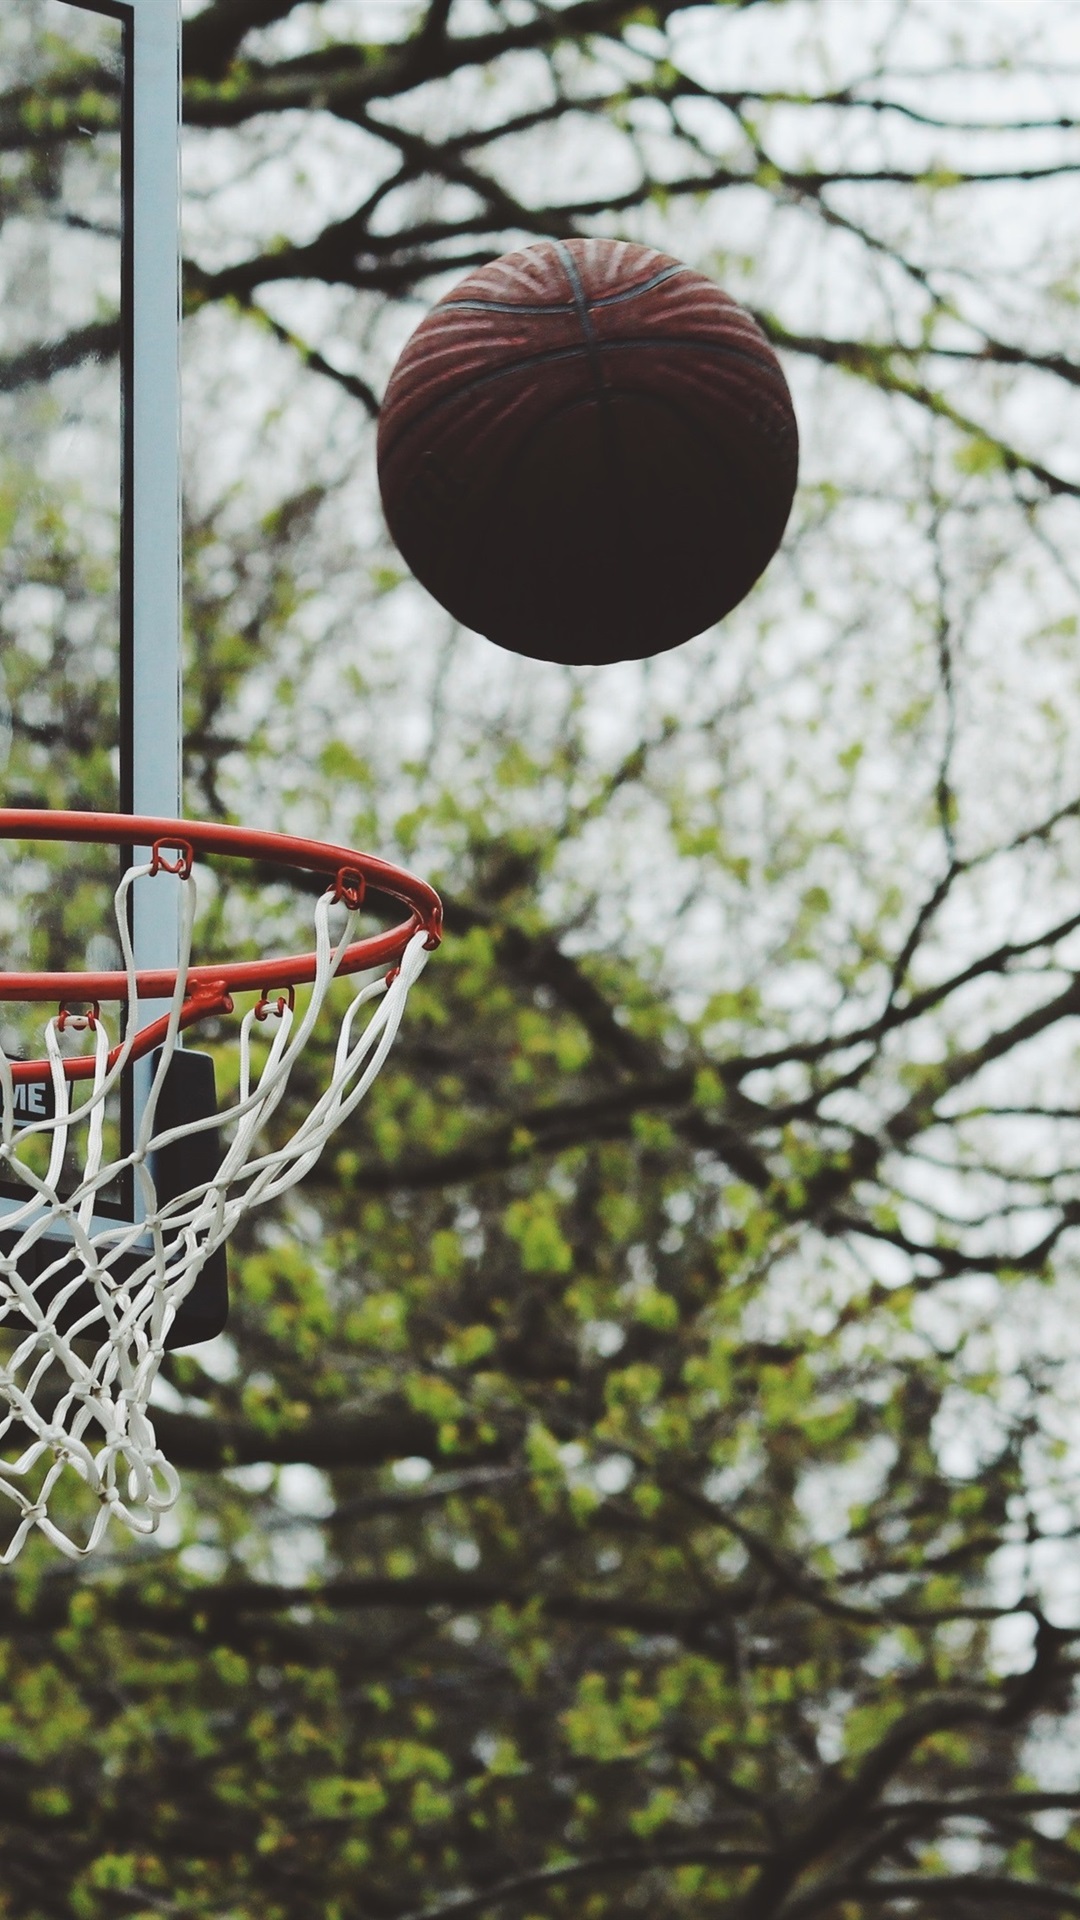 4K Basketball Ball Wallpapers High Quality Download Free